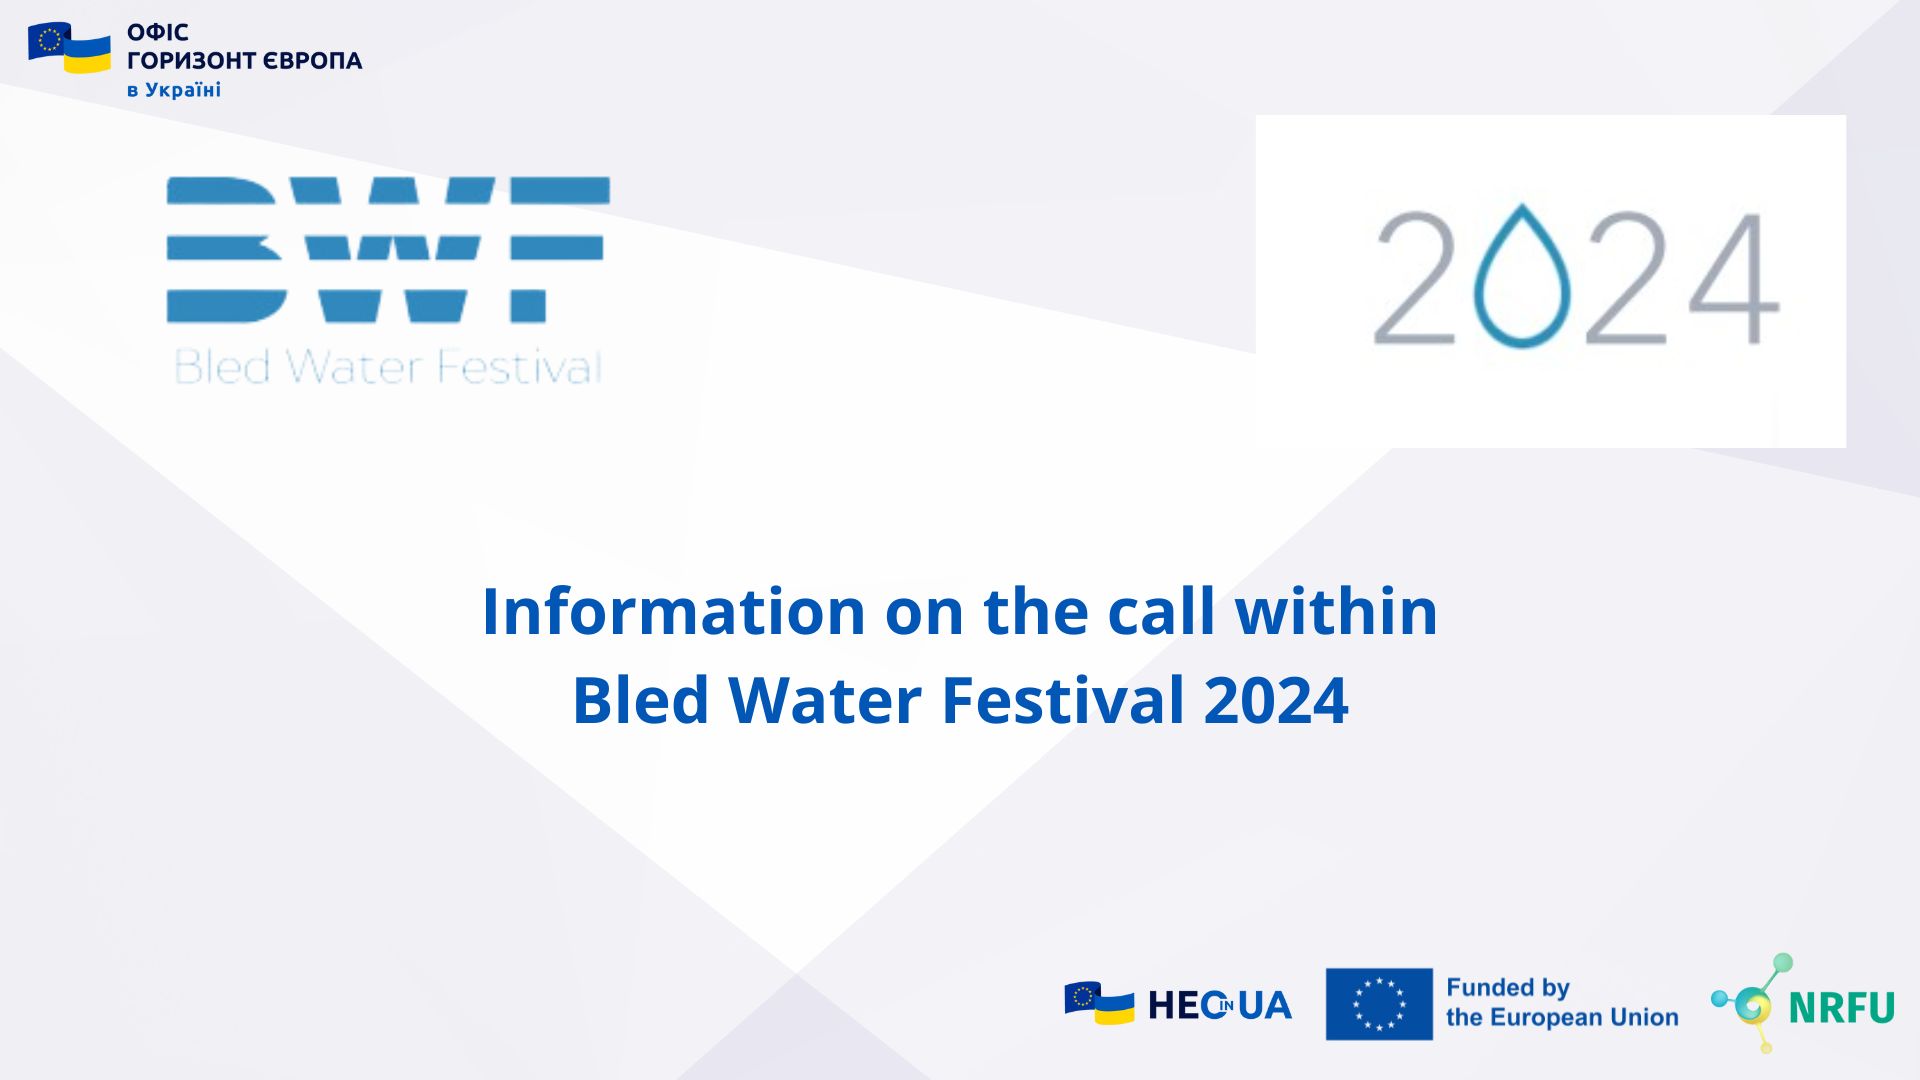 Information on the call within Bled Water Festival 2024